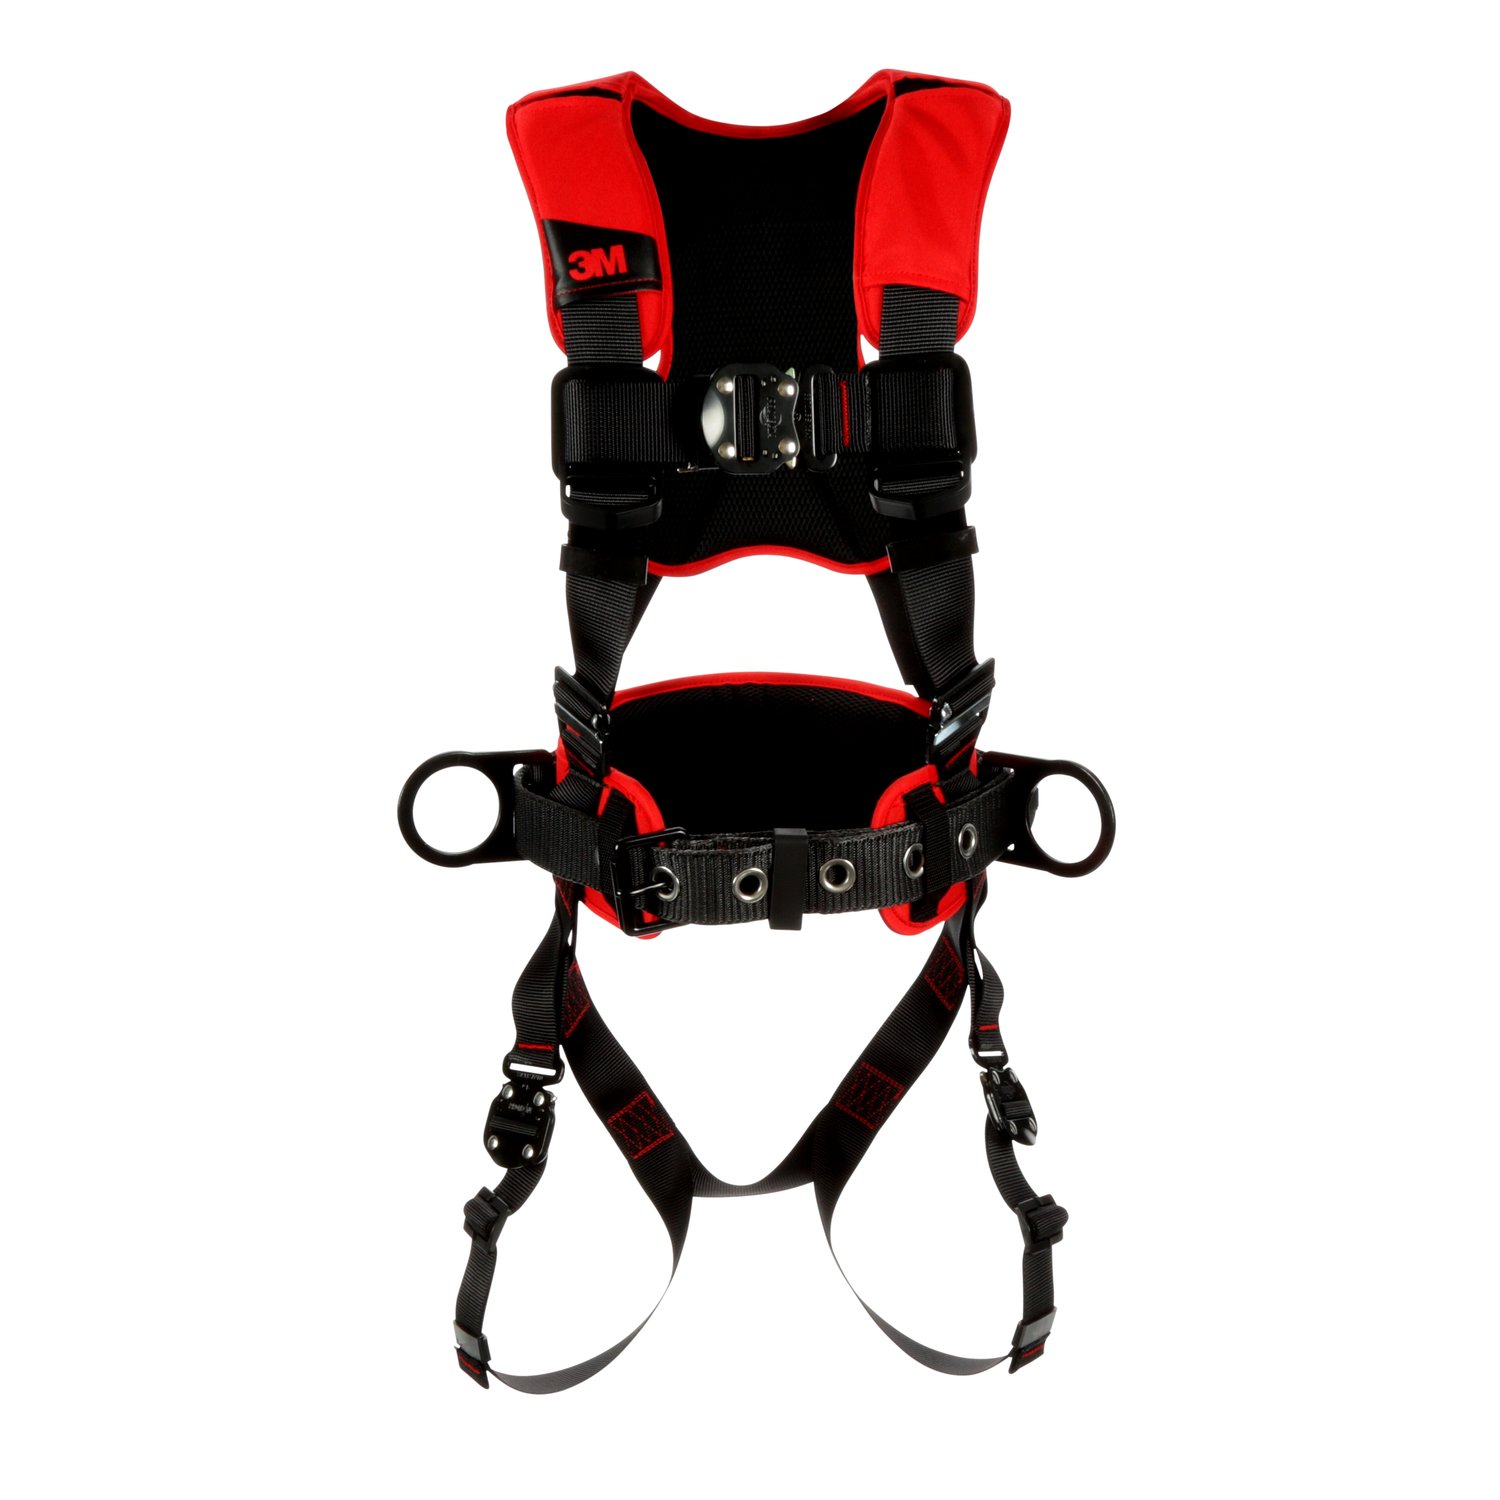 7100184596 - 3M Protecta P200 Comfort Construction Positioning Safety Harness
1161201, Medium/Large